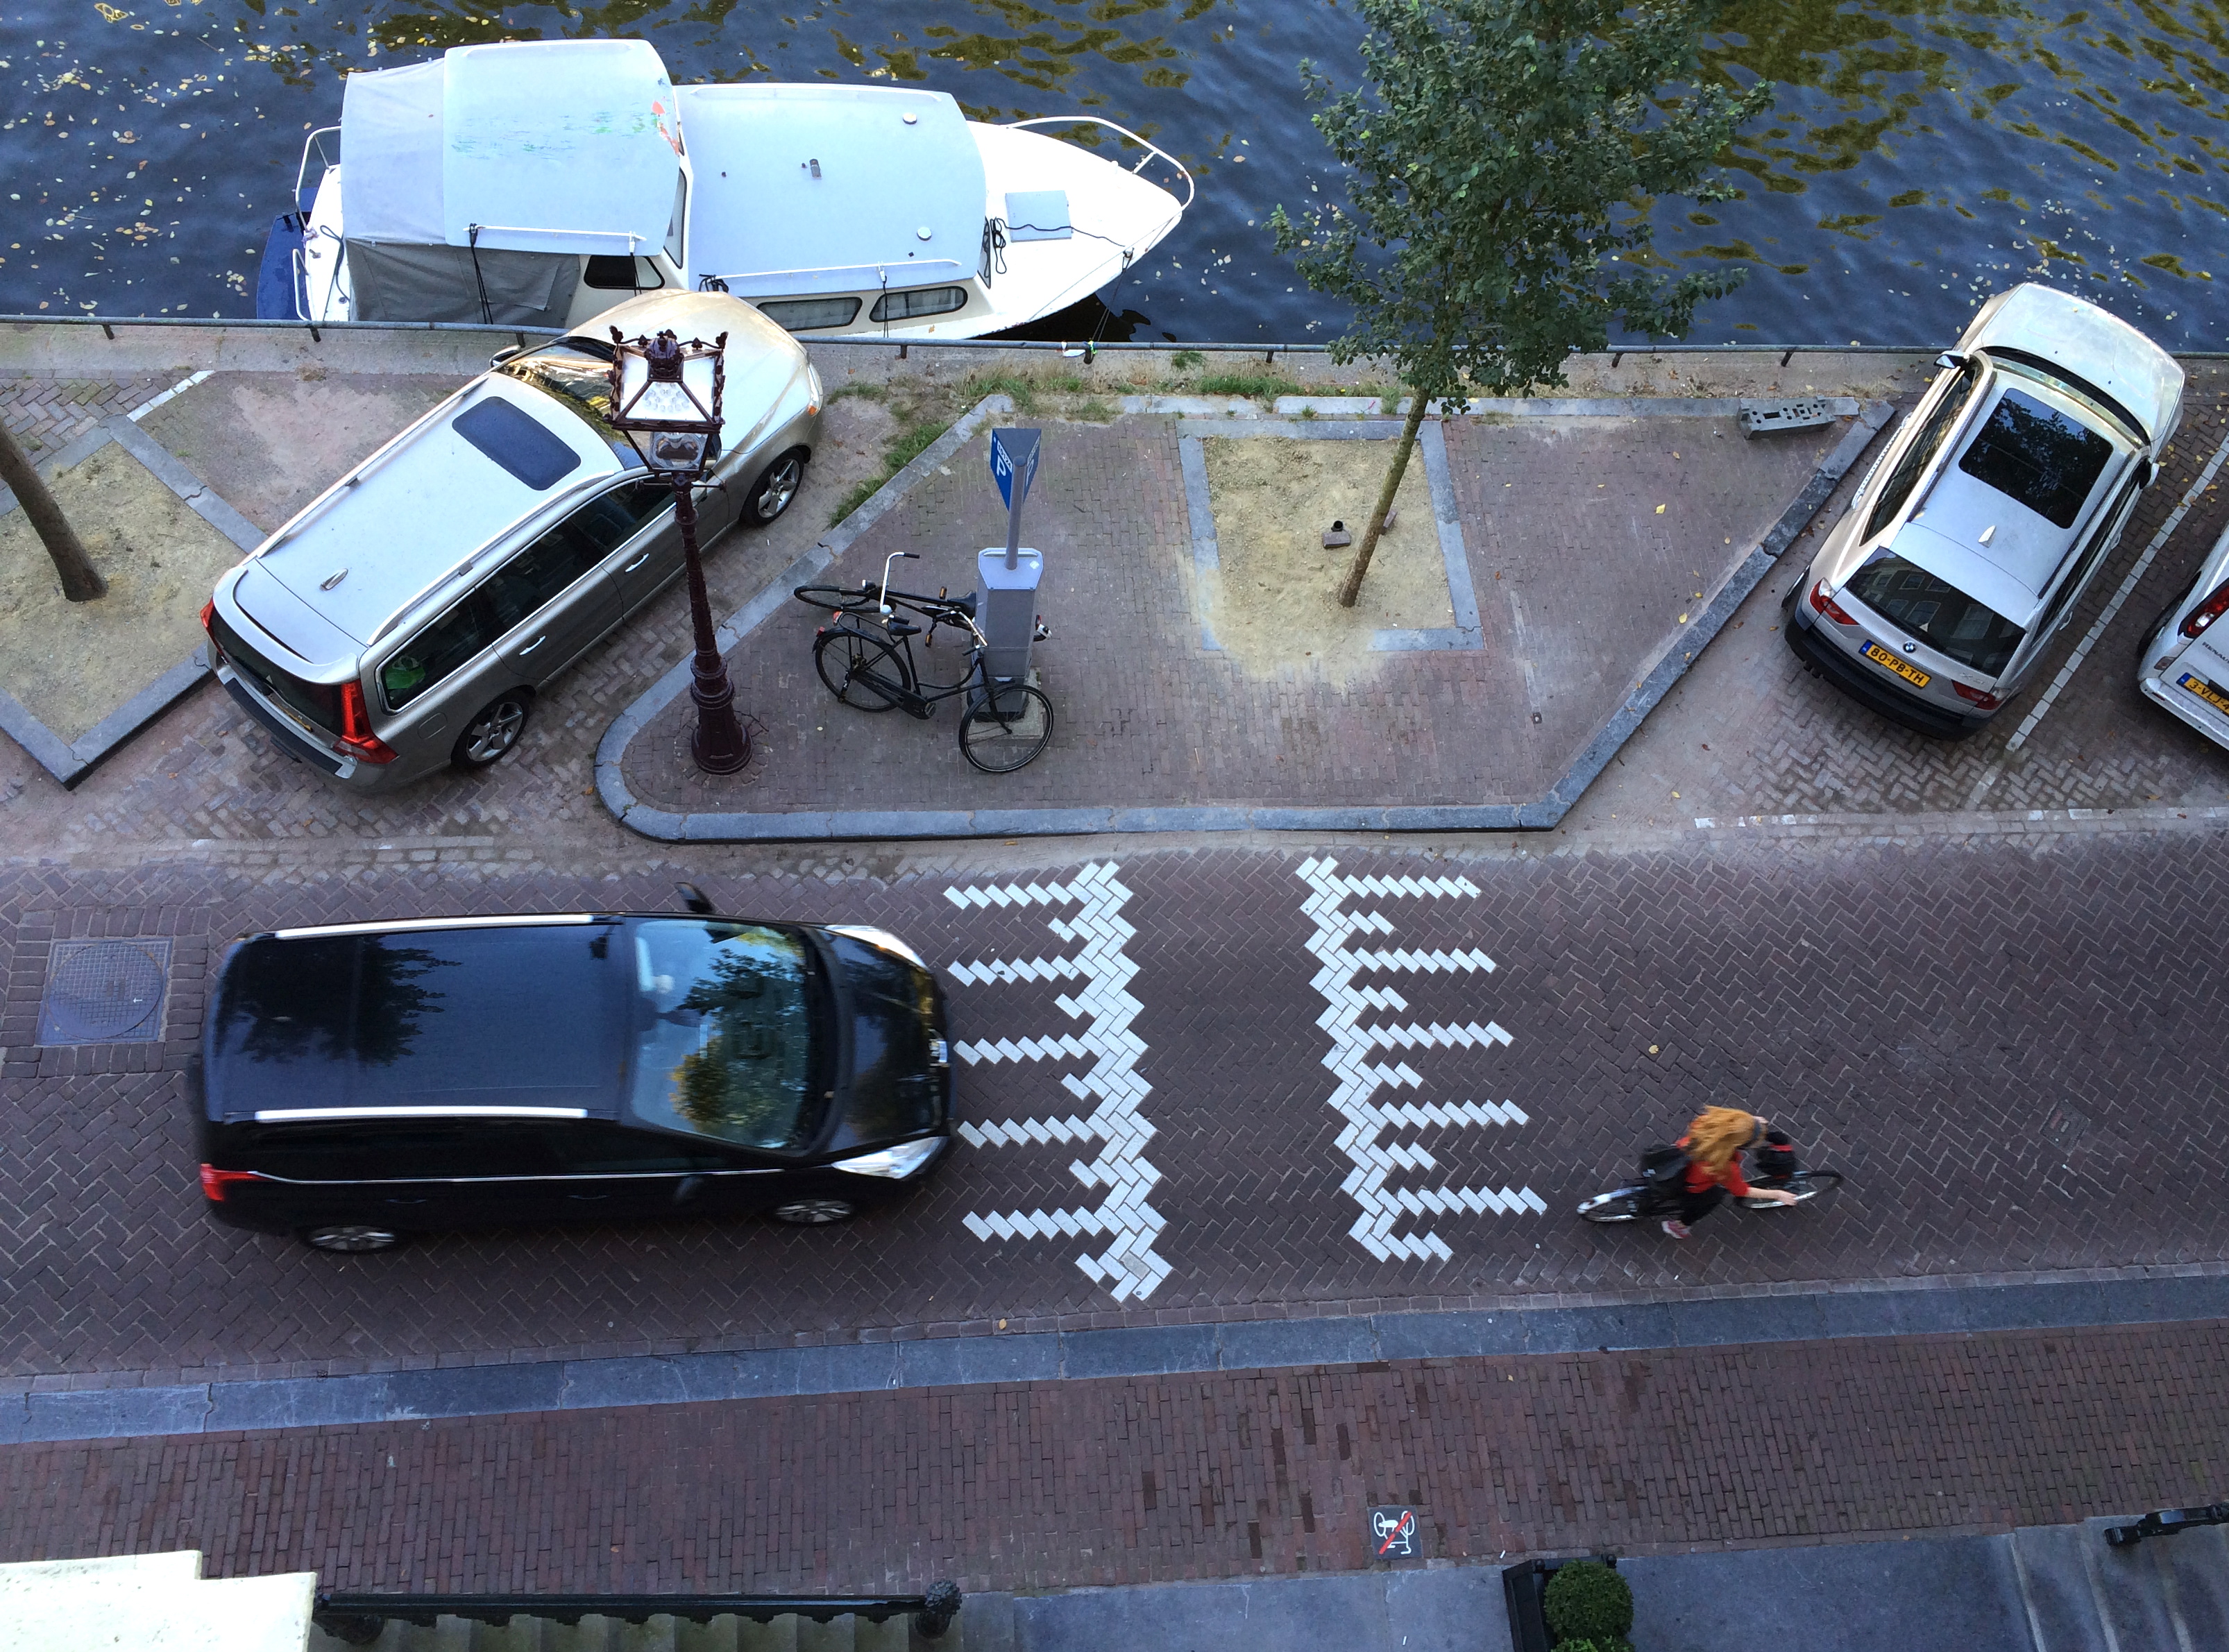 Narrow streets mean shared spaces in Amsterdam's core.